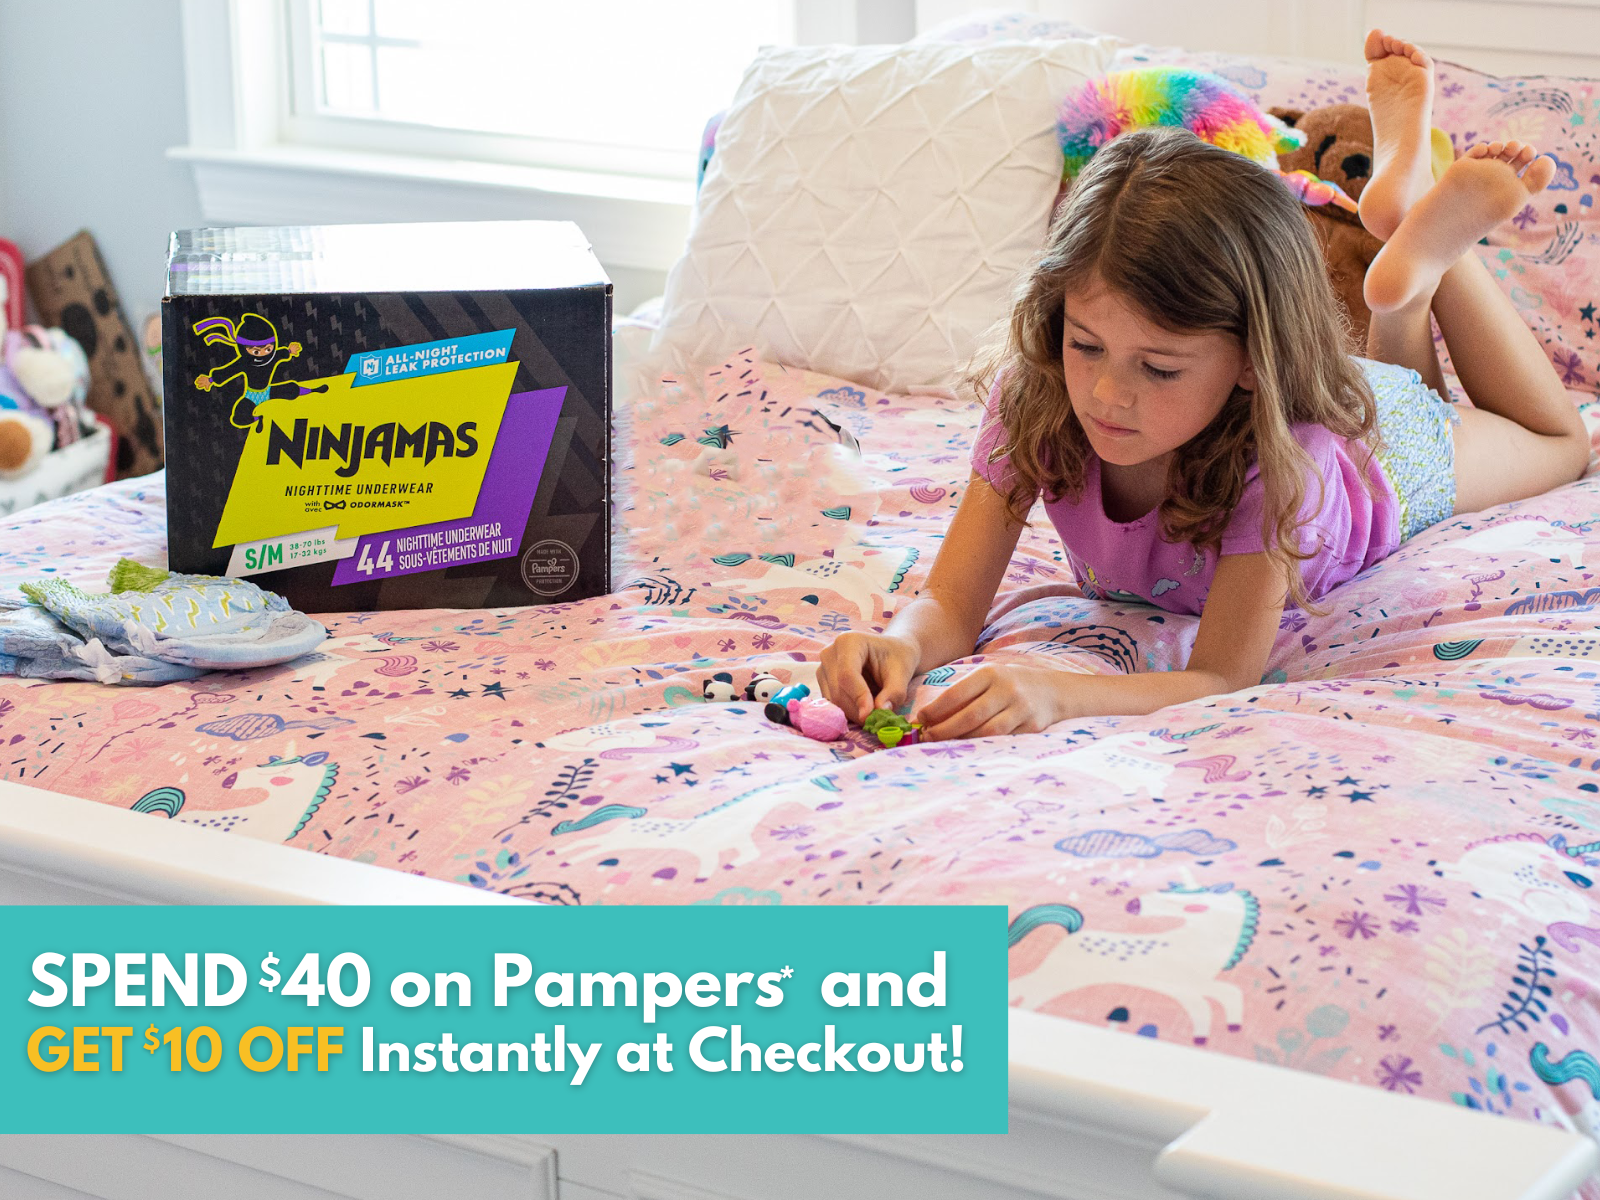 Still Time To Stock Up On Pampers & Score Savings - iHeartPublix